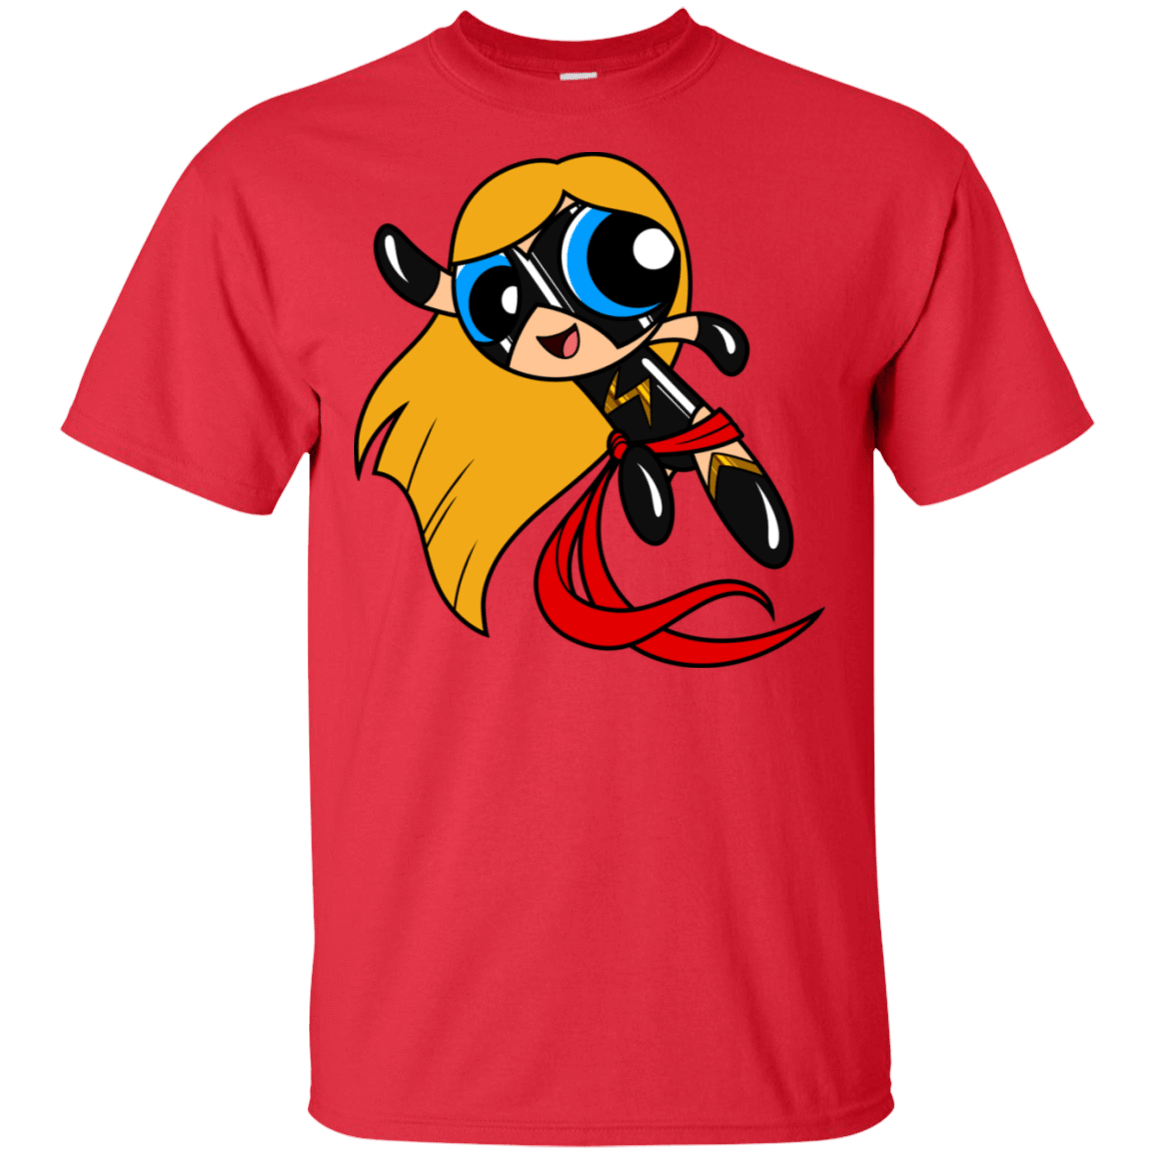 T-Shirts Red / S Ms Marvel Puff T-Shirt